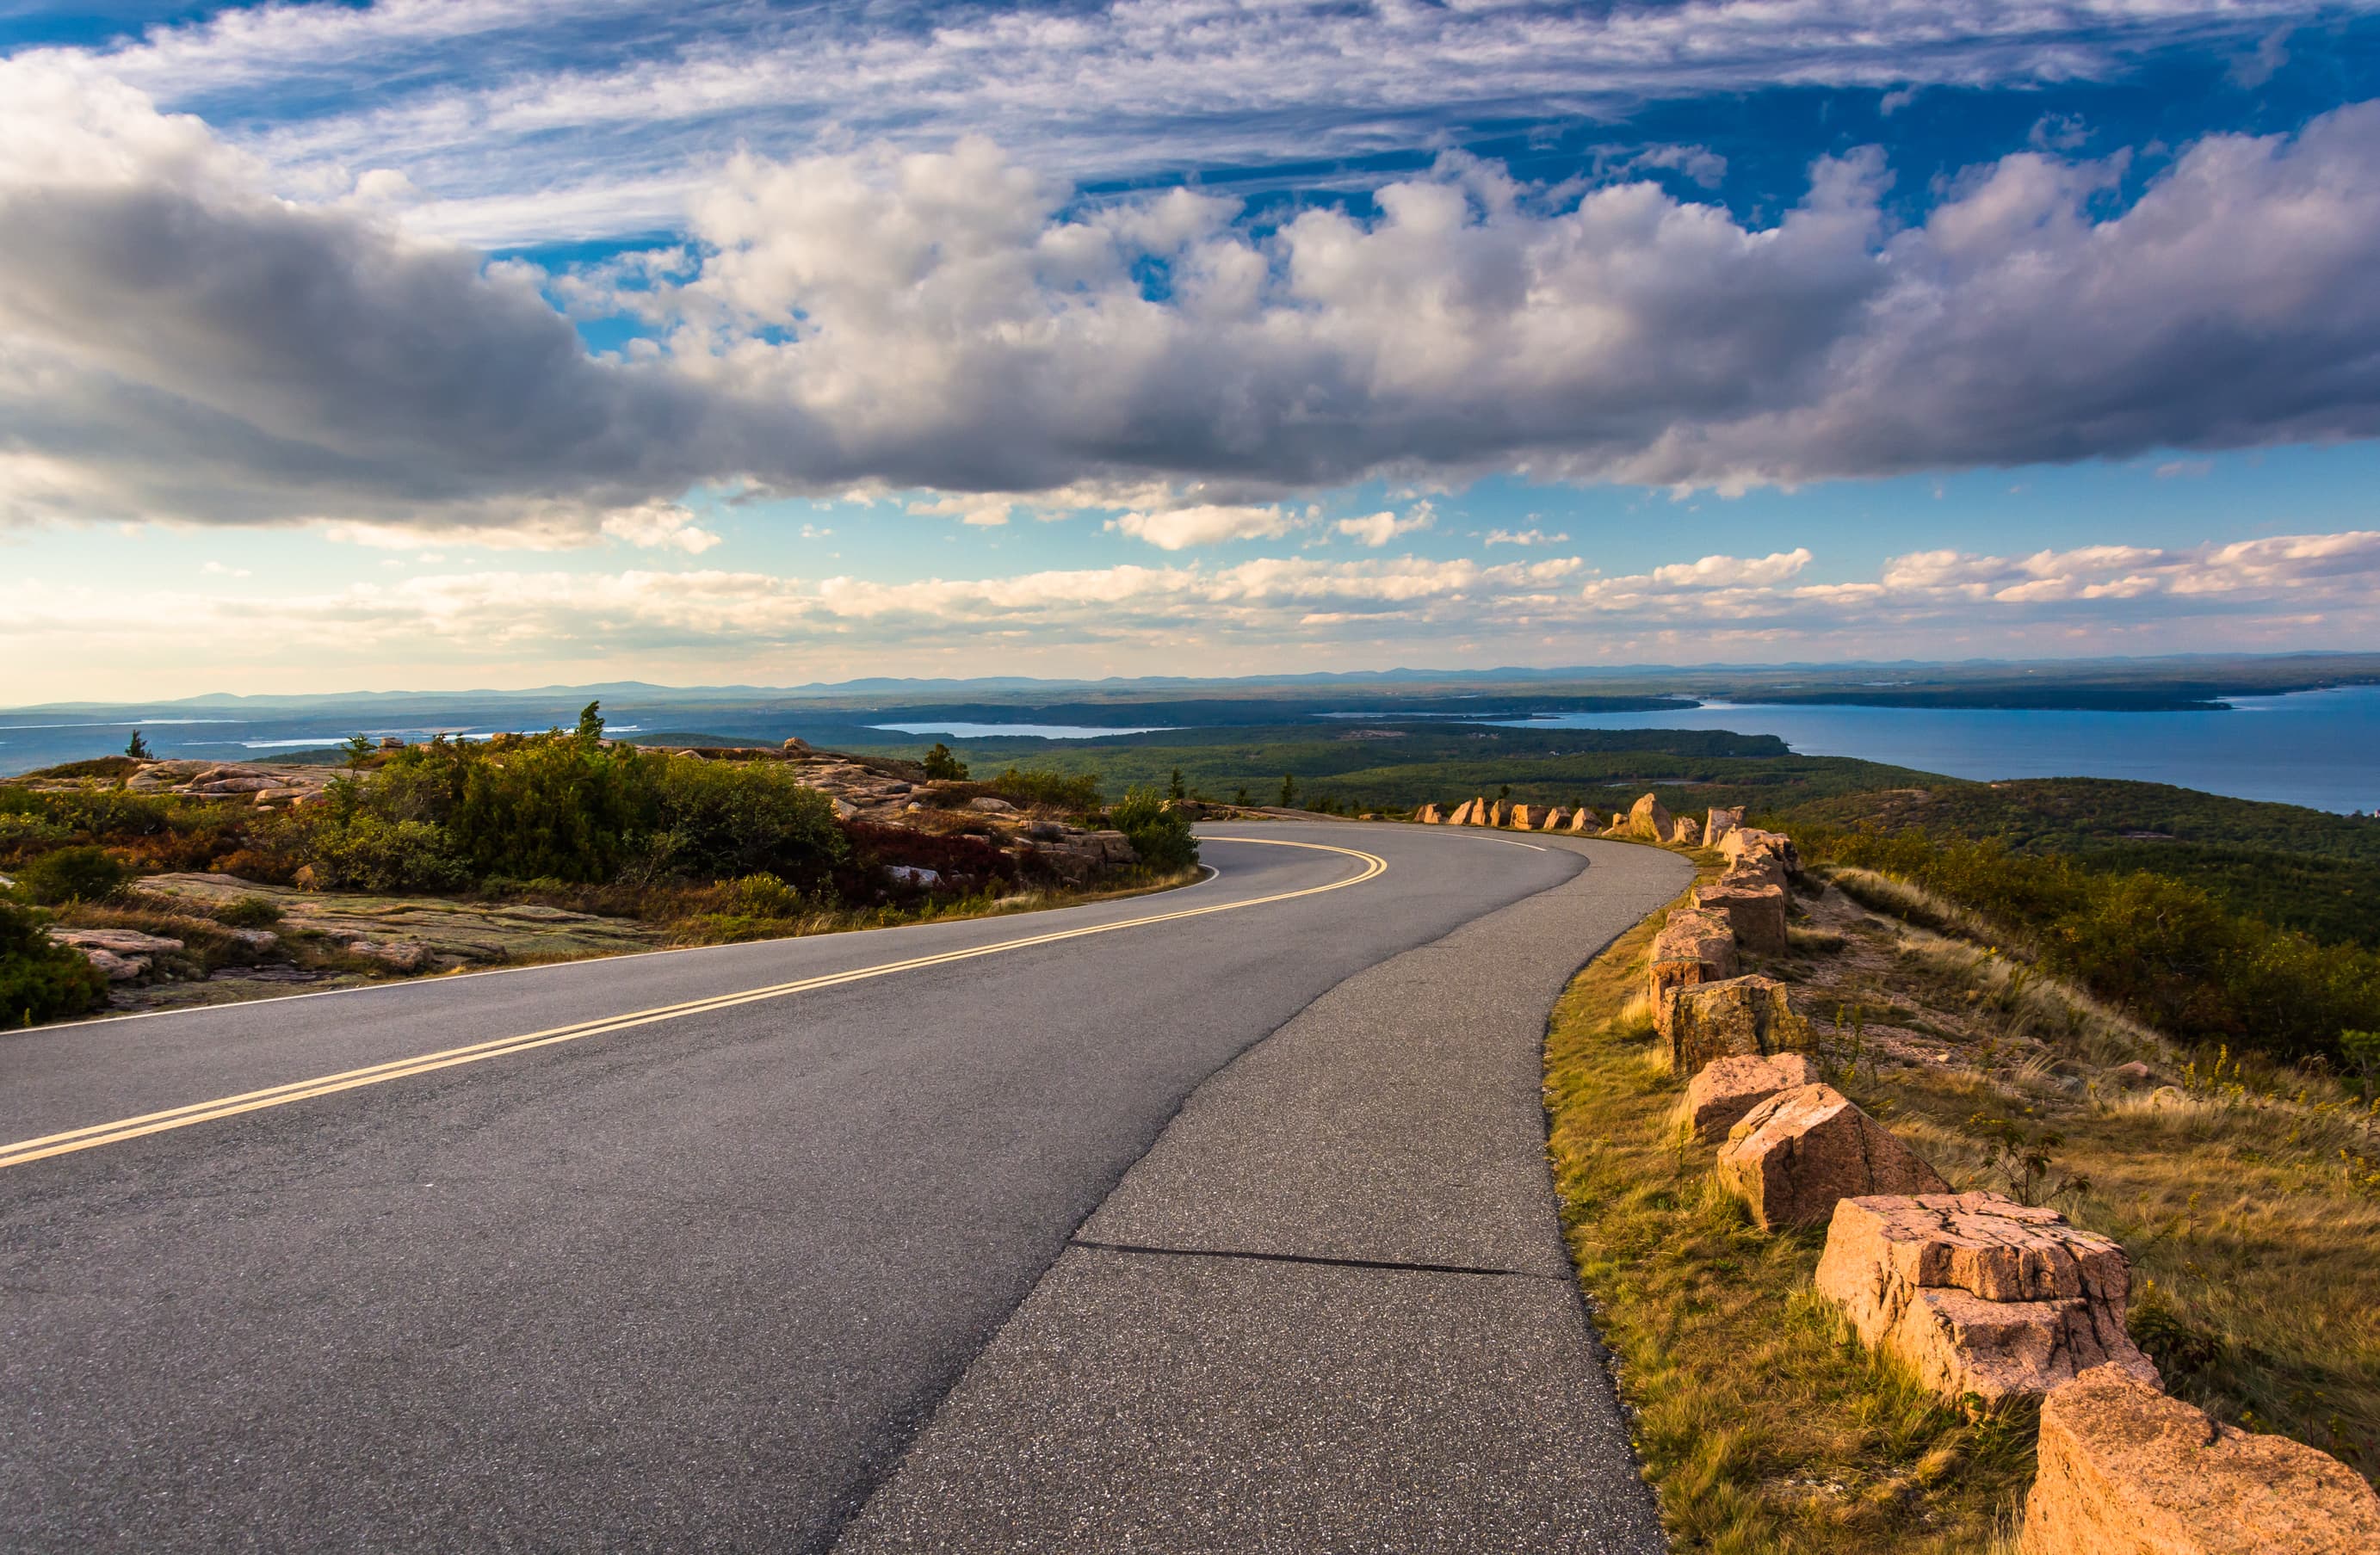 The road to Caddilac Mountain, in Acadia National Park, Maine